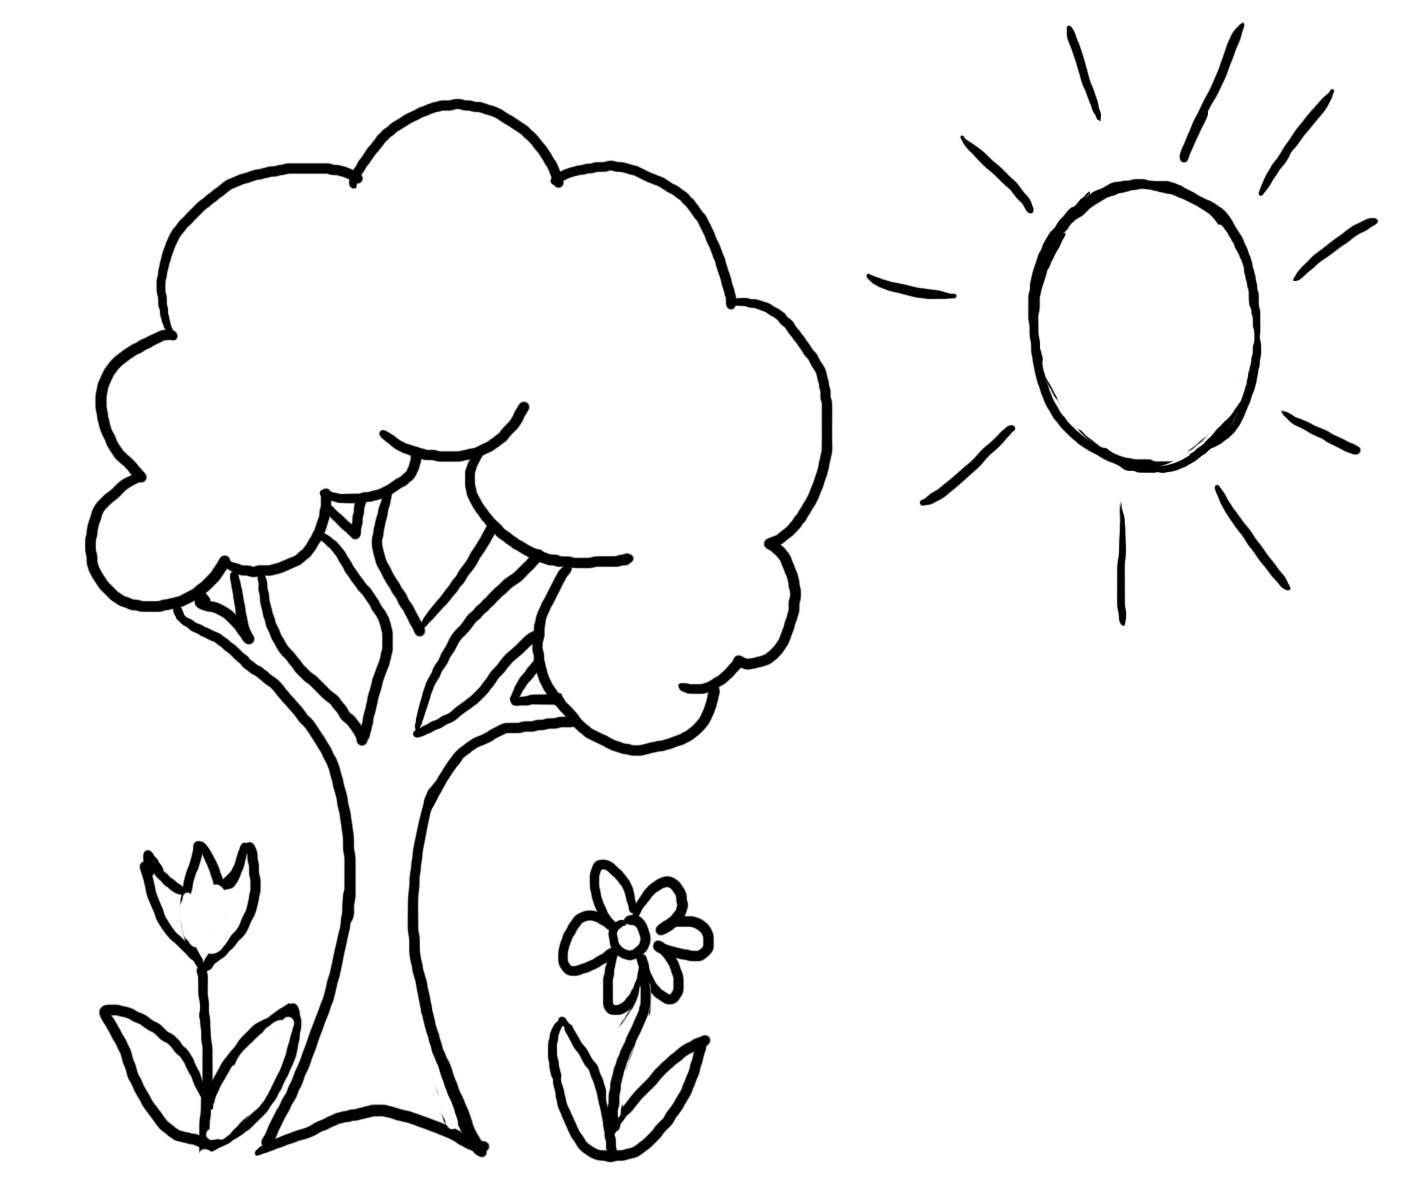 Tree Coloring Page for Preschool